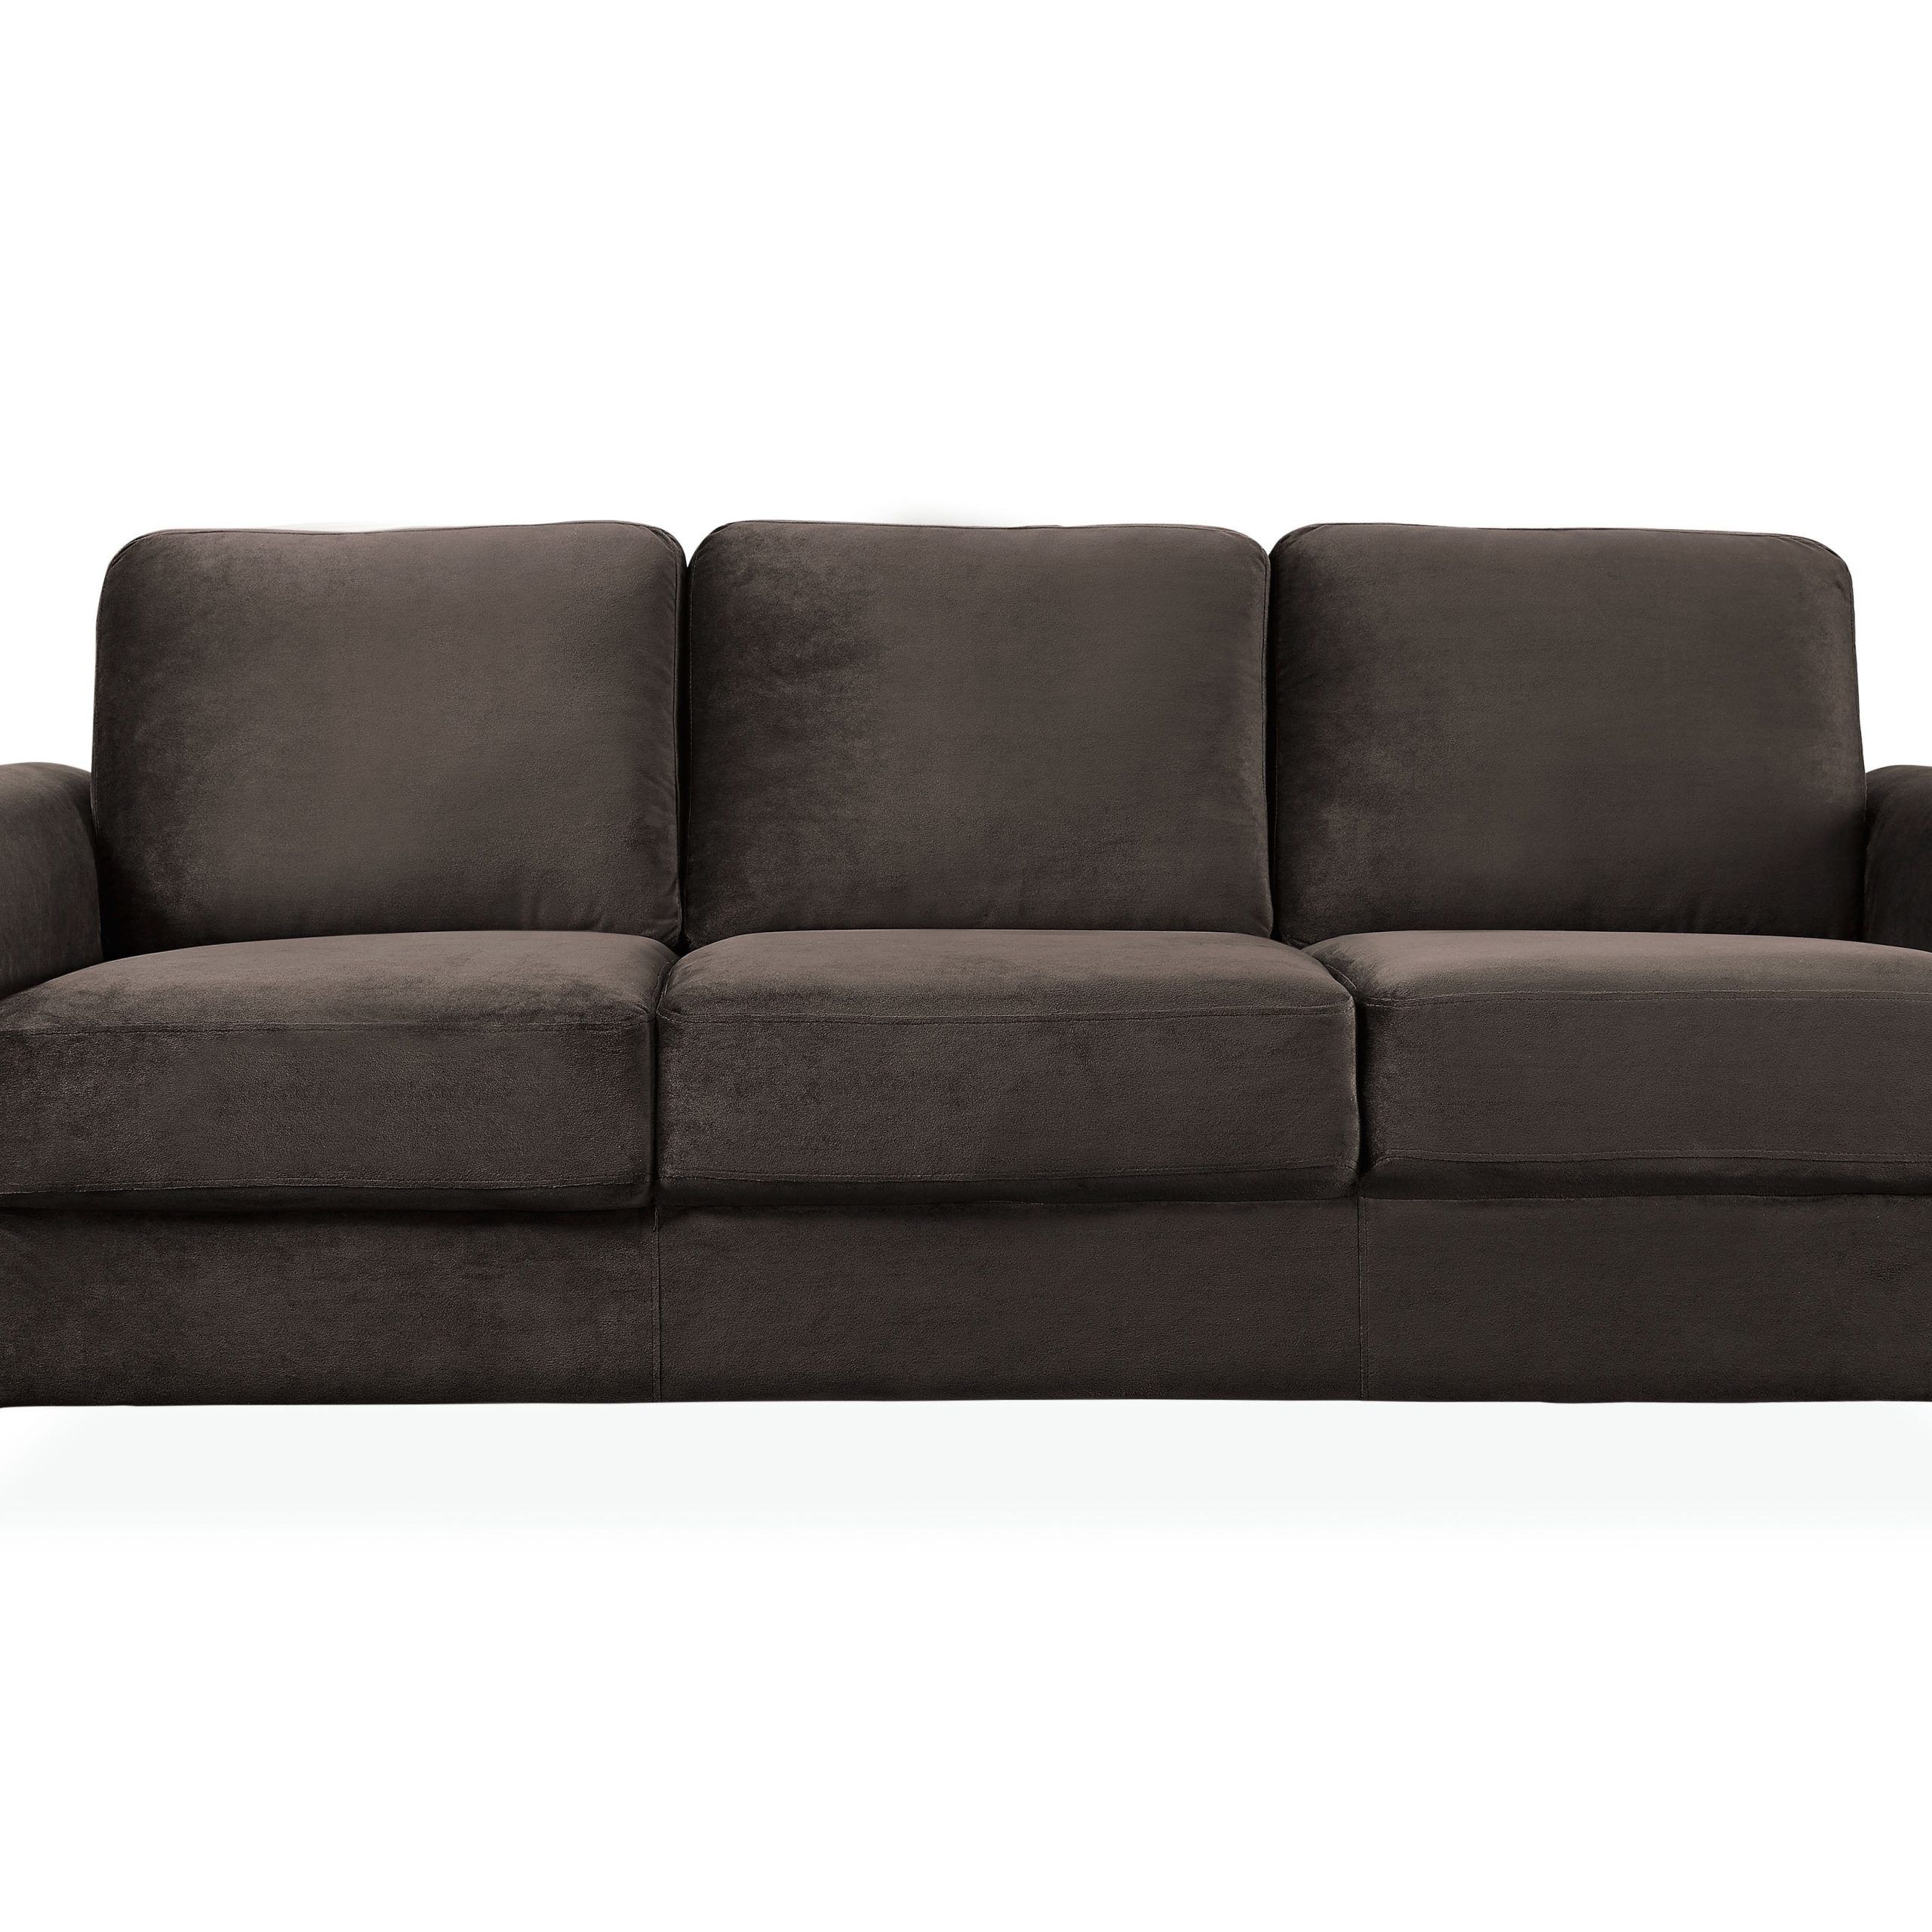 Lifestyle Solutions Alexa Sofa With Curved Arms, Gray Fabric – Walmart For Sofas With Curved Arms (Photo 7 of 15)